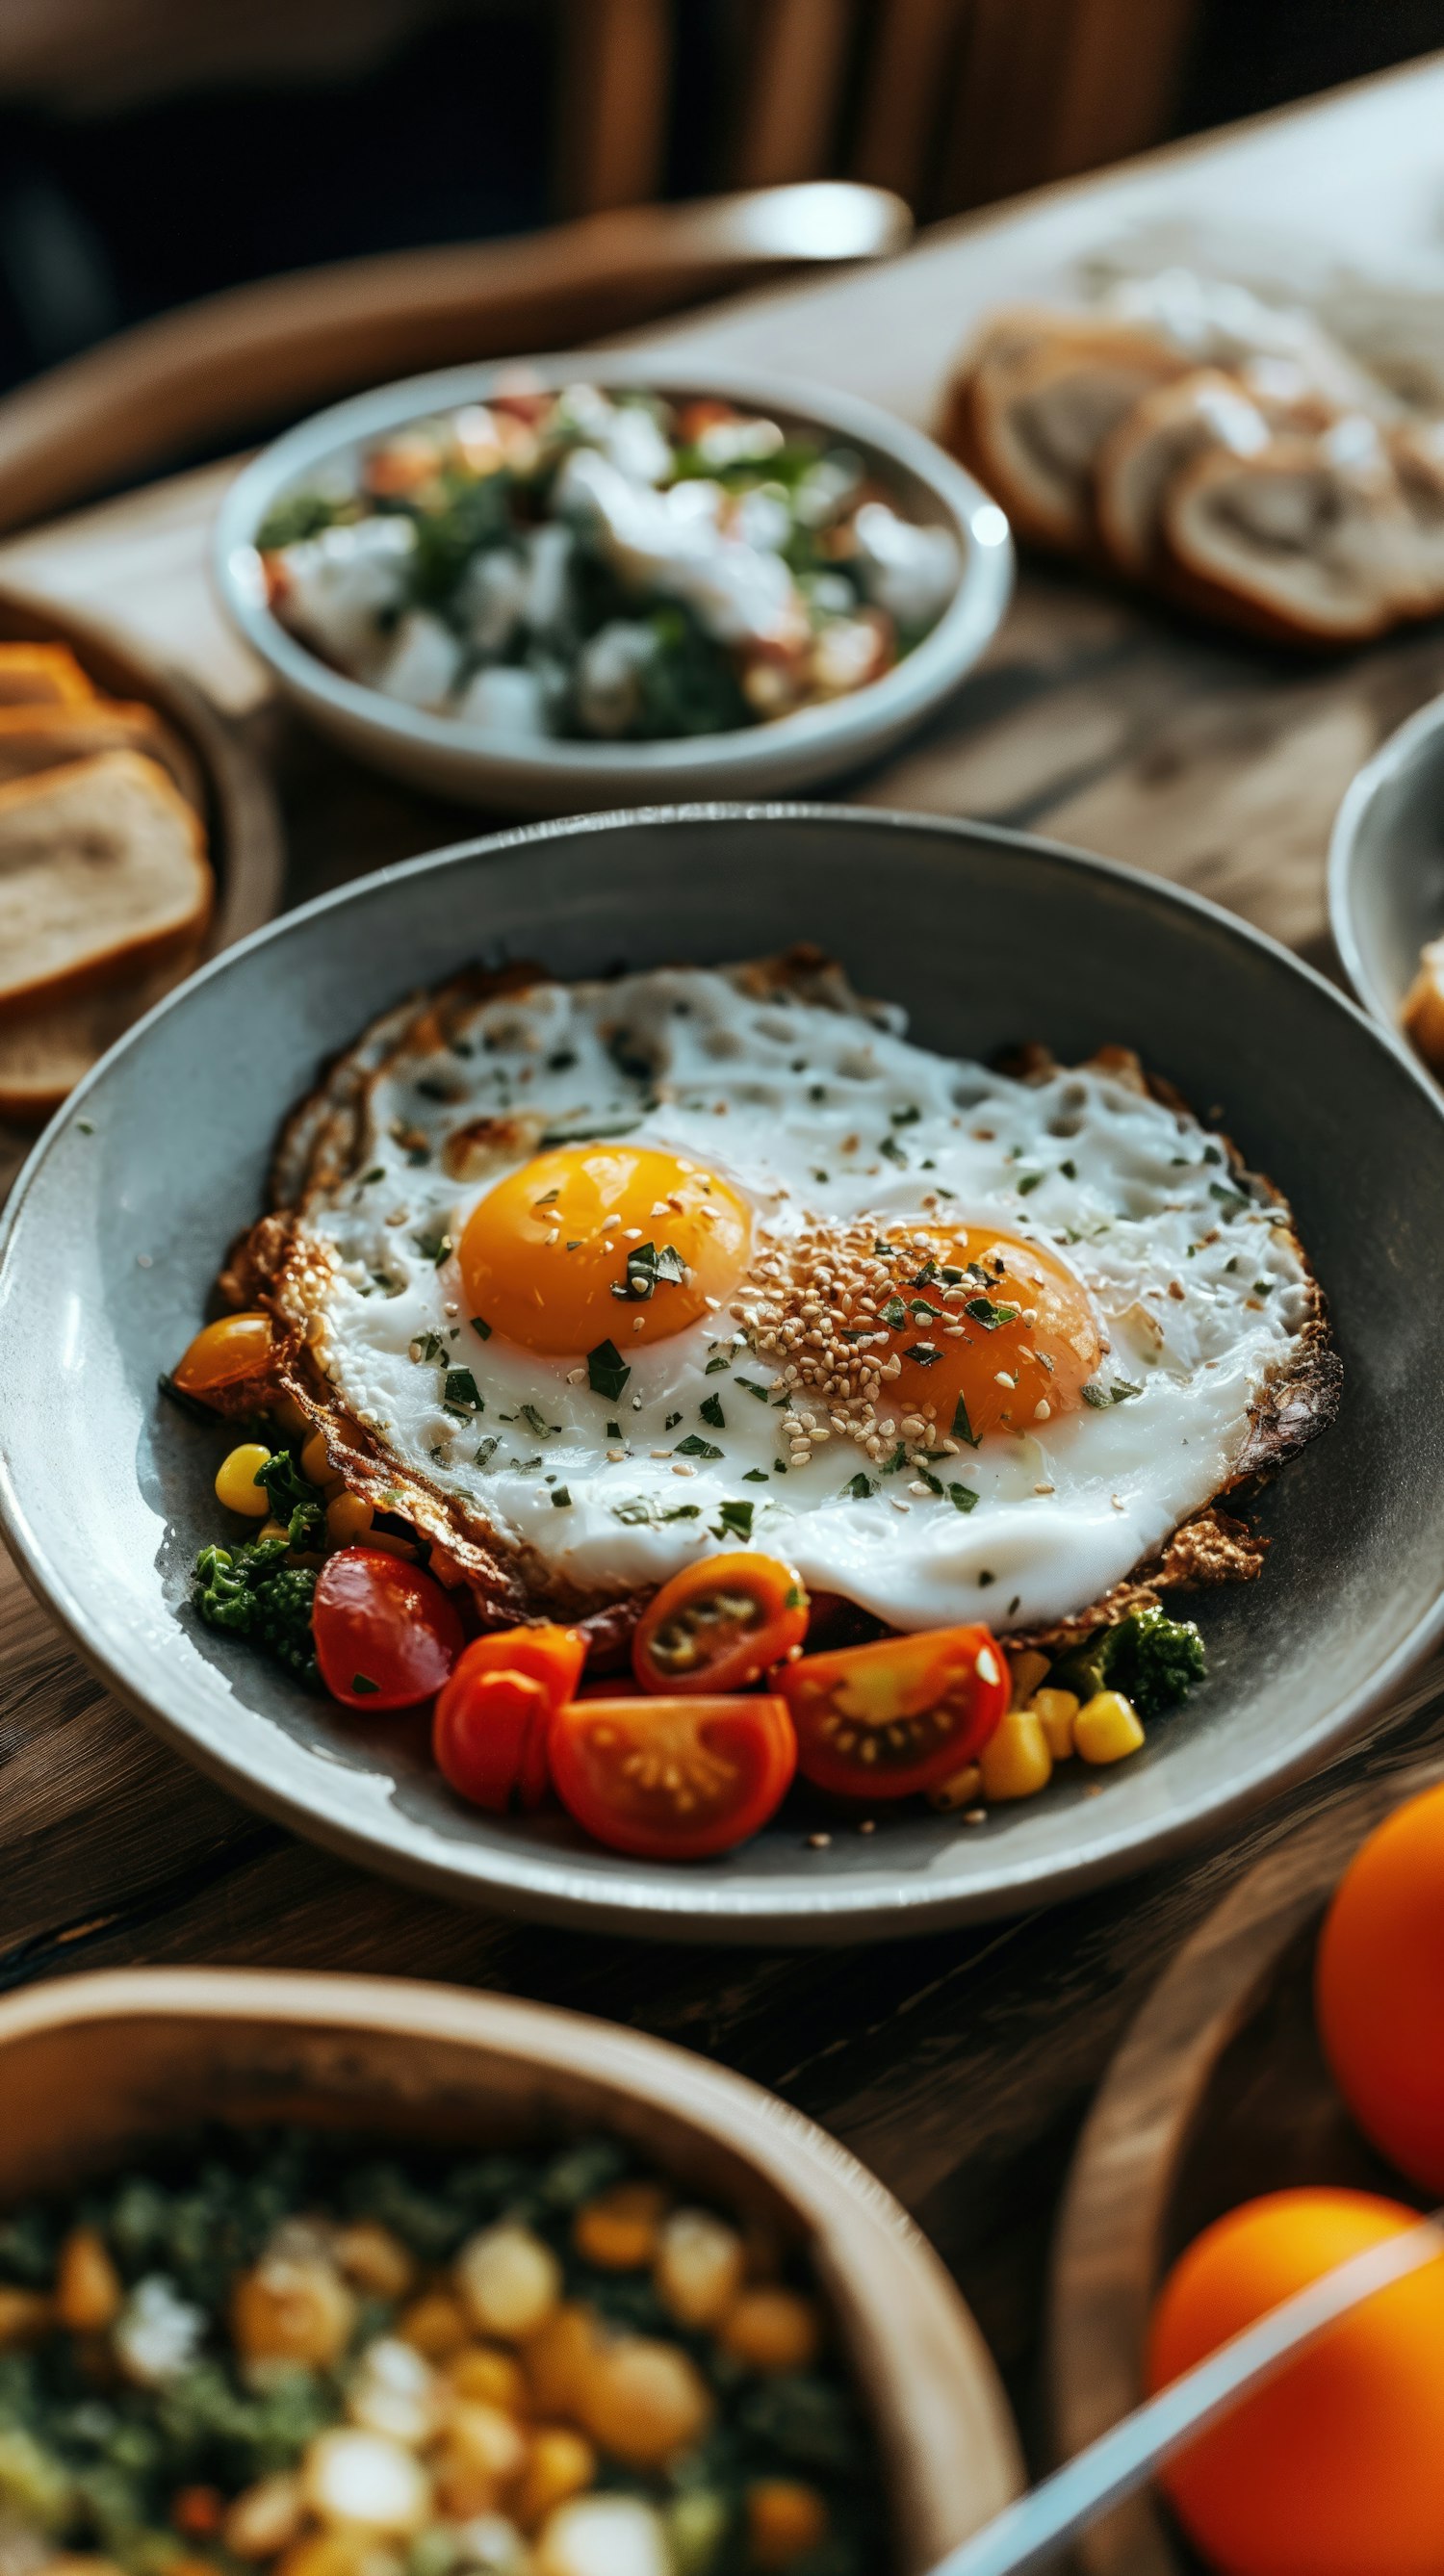 Cozy Breakfast Setting with Fried Eggs